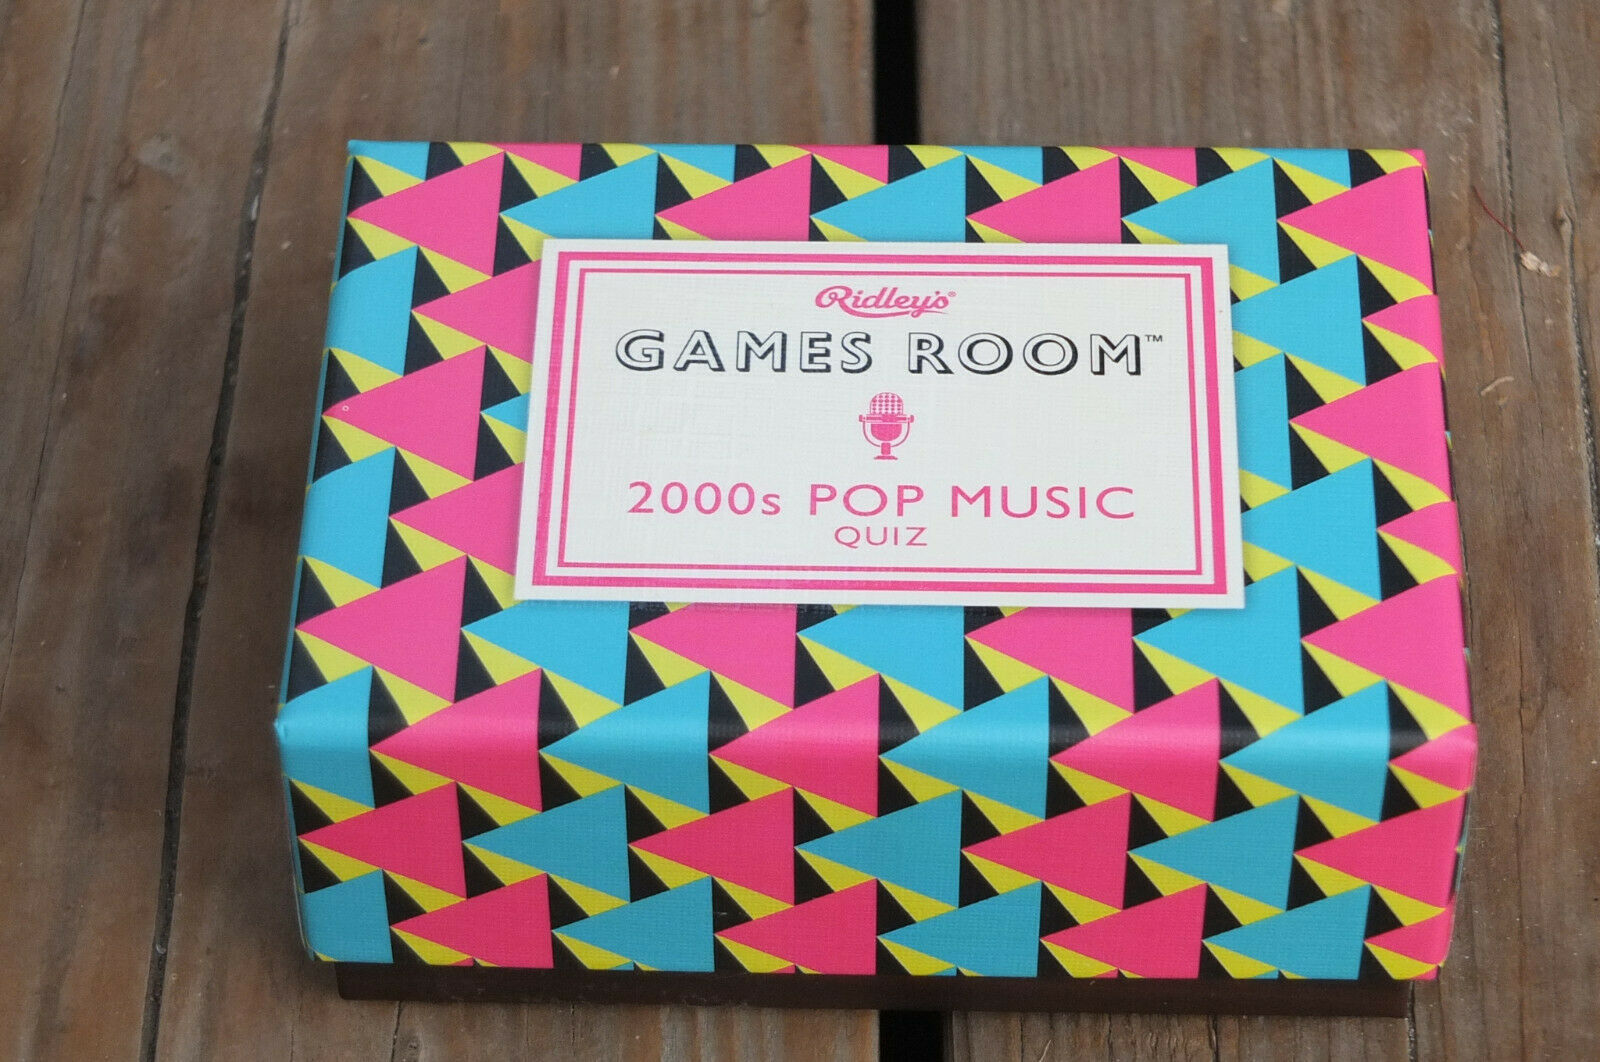 RIDLEY'S GAMES ROOM ~ 2000s Pop Music Quiz Cards Family Gifts Fun ~ SHIPS FREE - $14.99